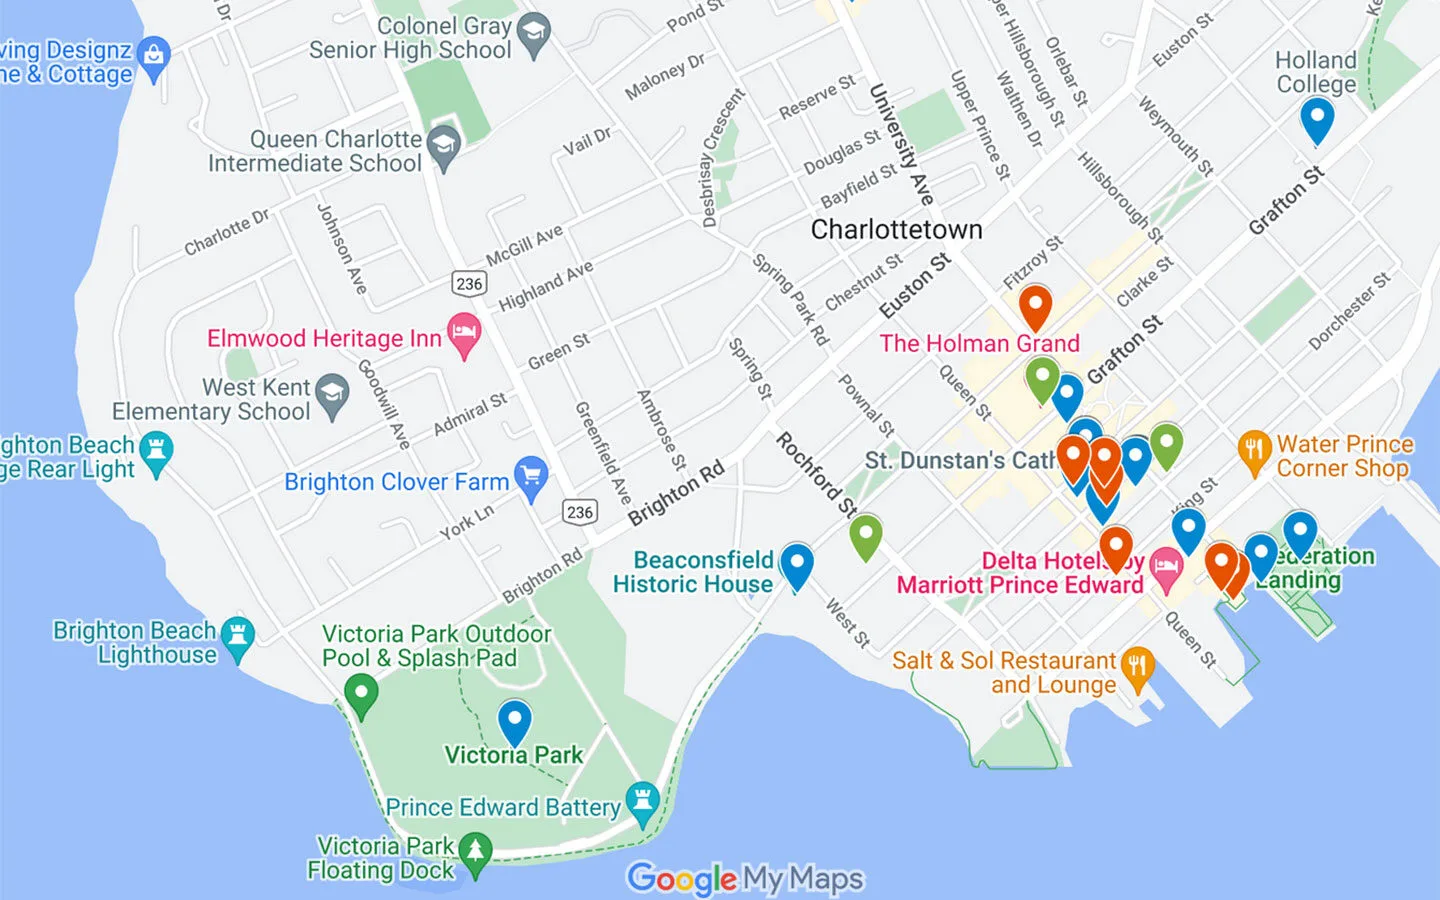 A weekend in Charlottetown, PEI: 2-day Charlottetown itinerary map